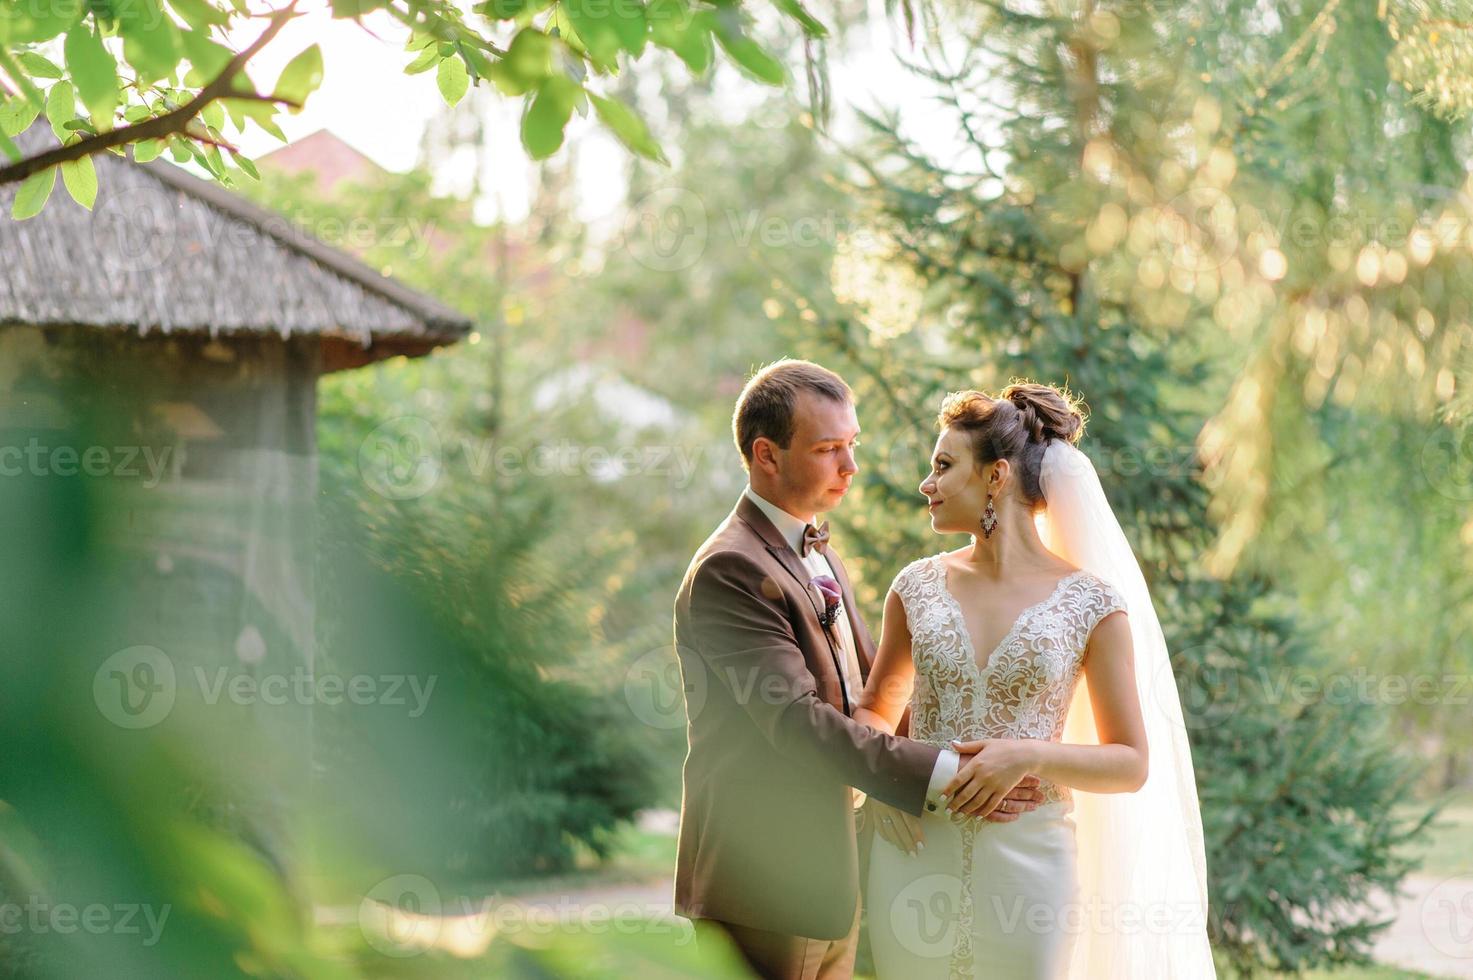 Evening photo session of the bride and groom in nature